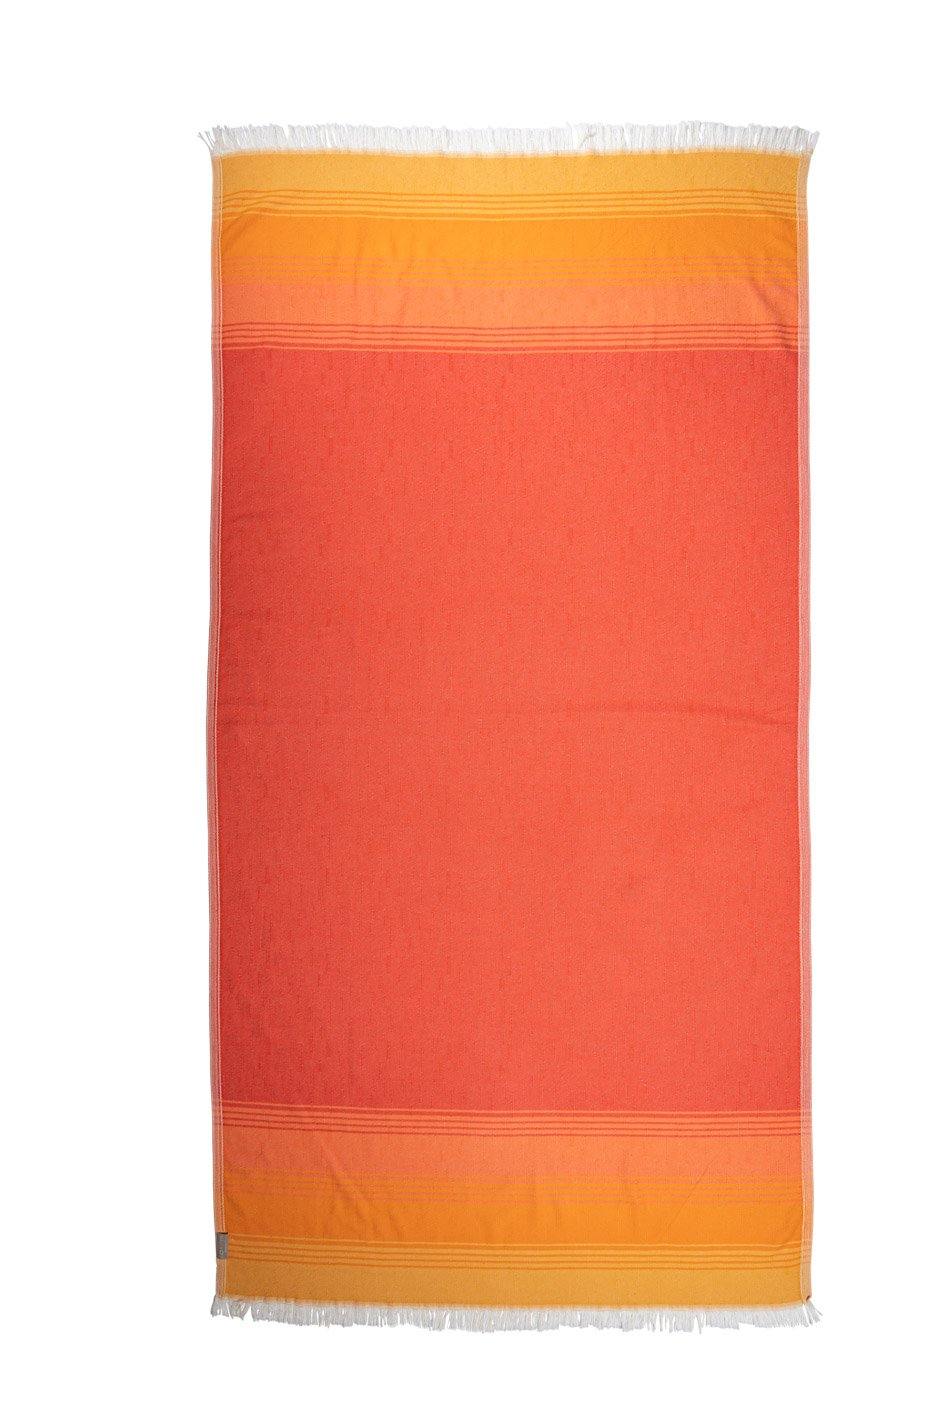 Sunset inspired colours make up this lightweight beach towel, taken against a white backdrop.